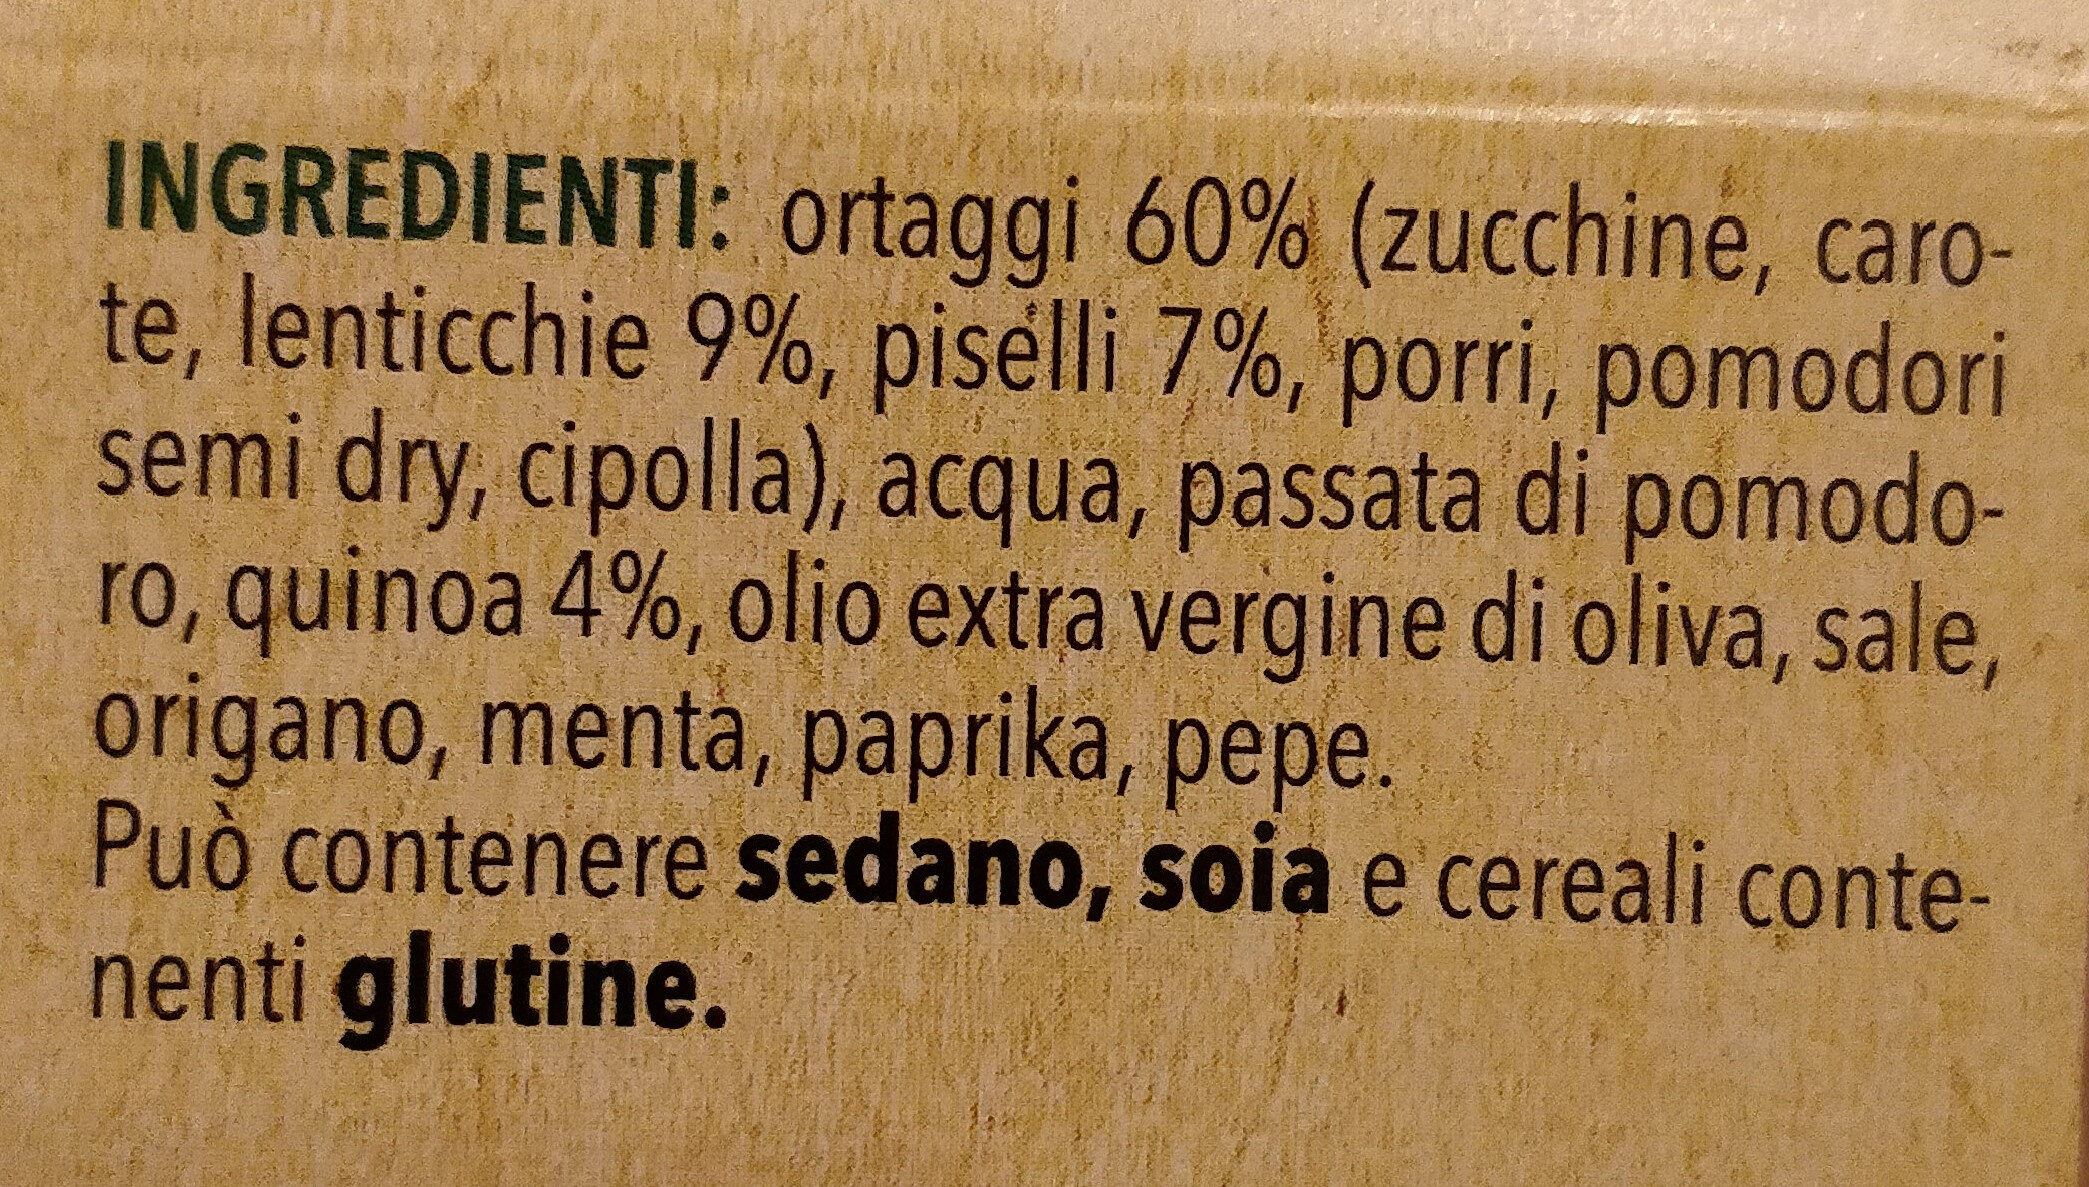 Le zuppe - Ingredienti